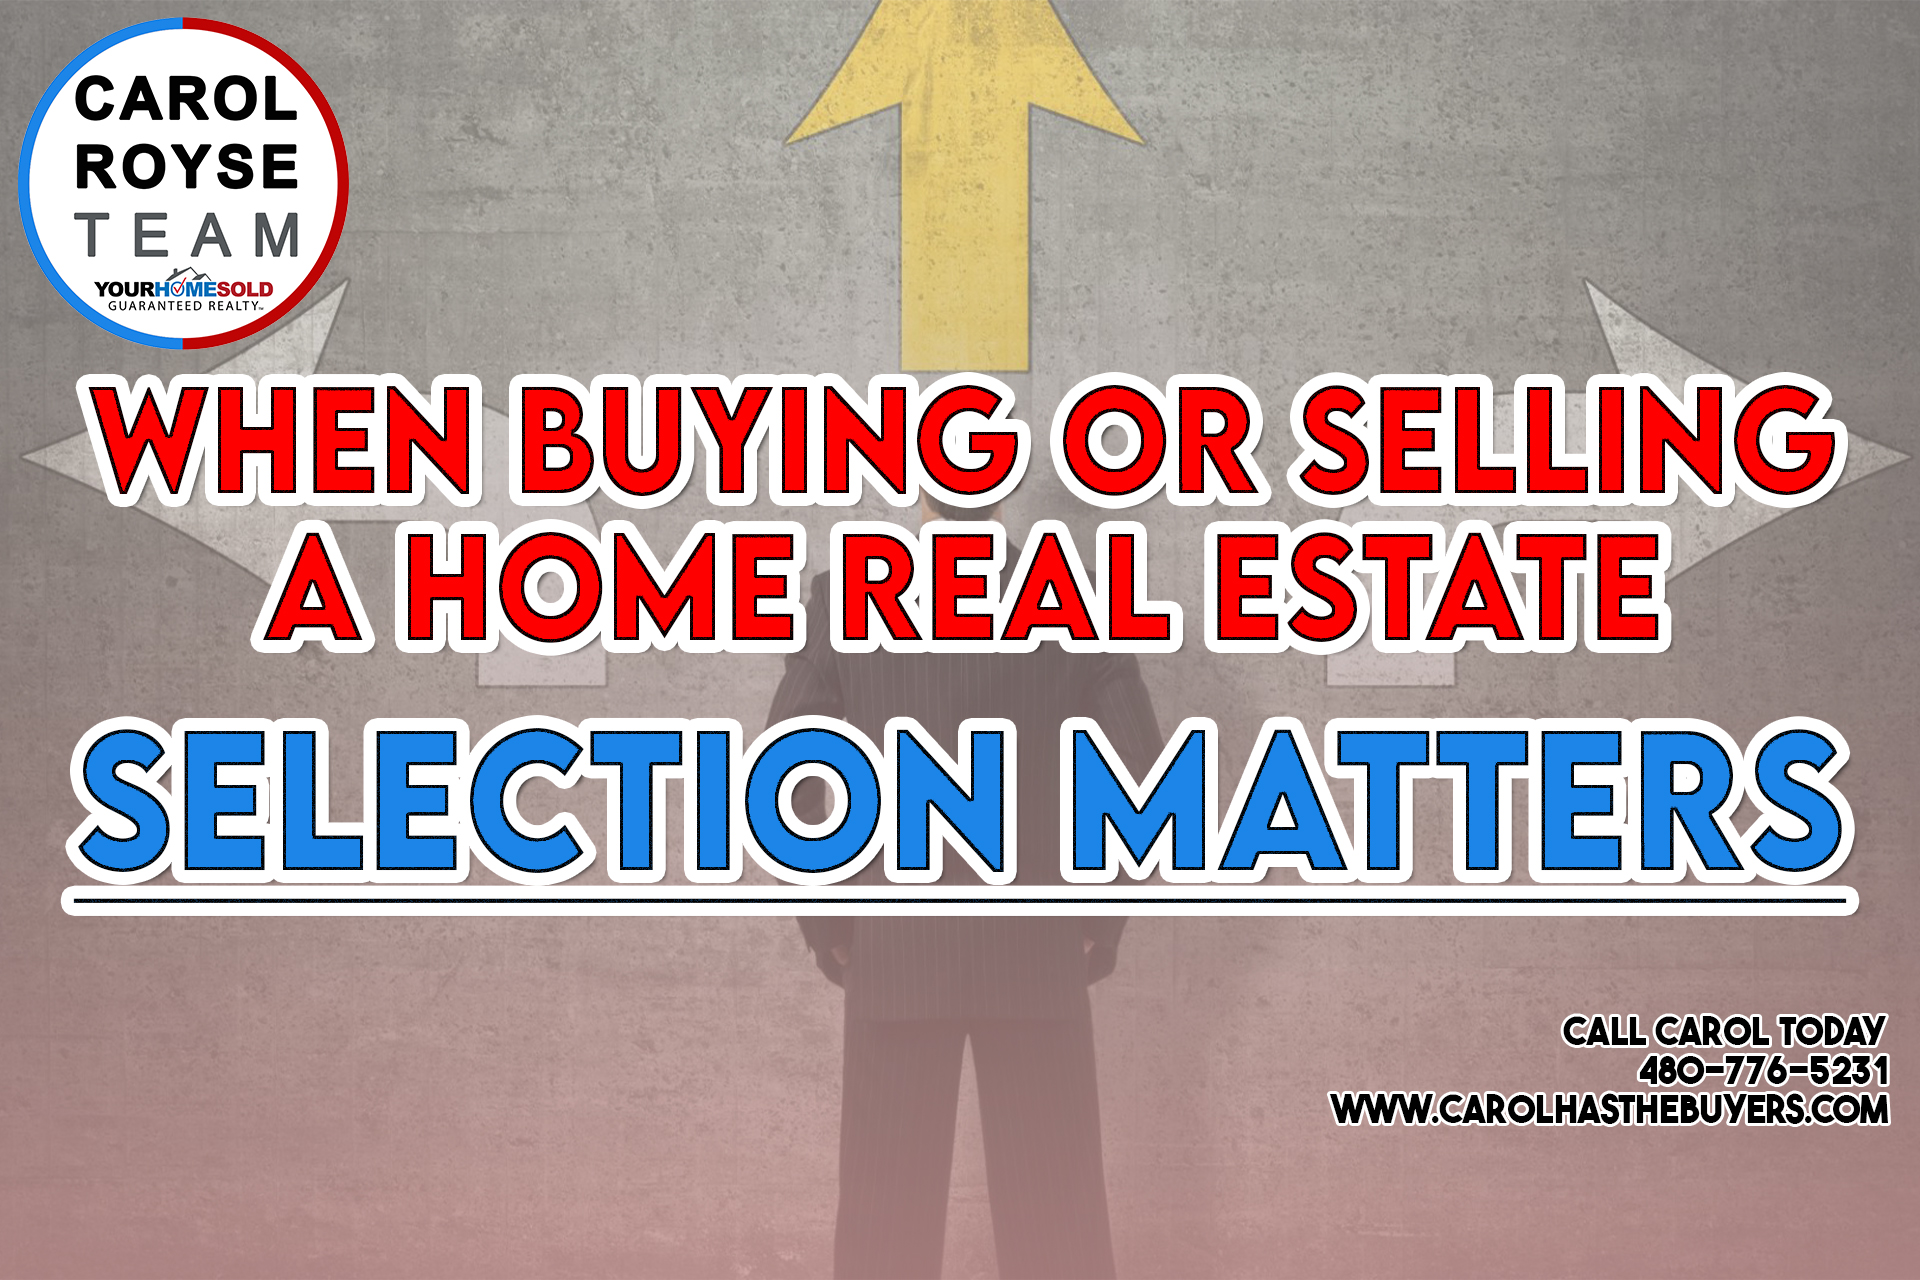 When Buying or Selling a Home Real Estate Selection Matters